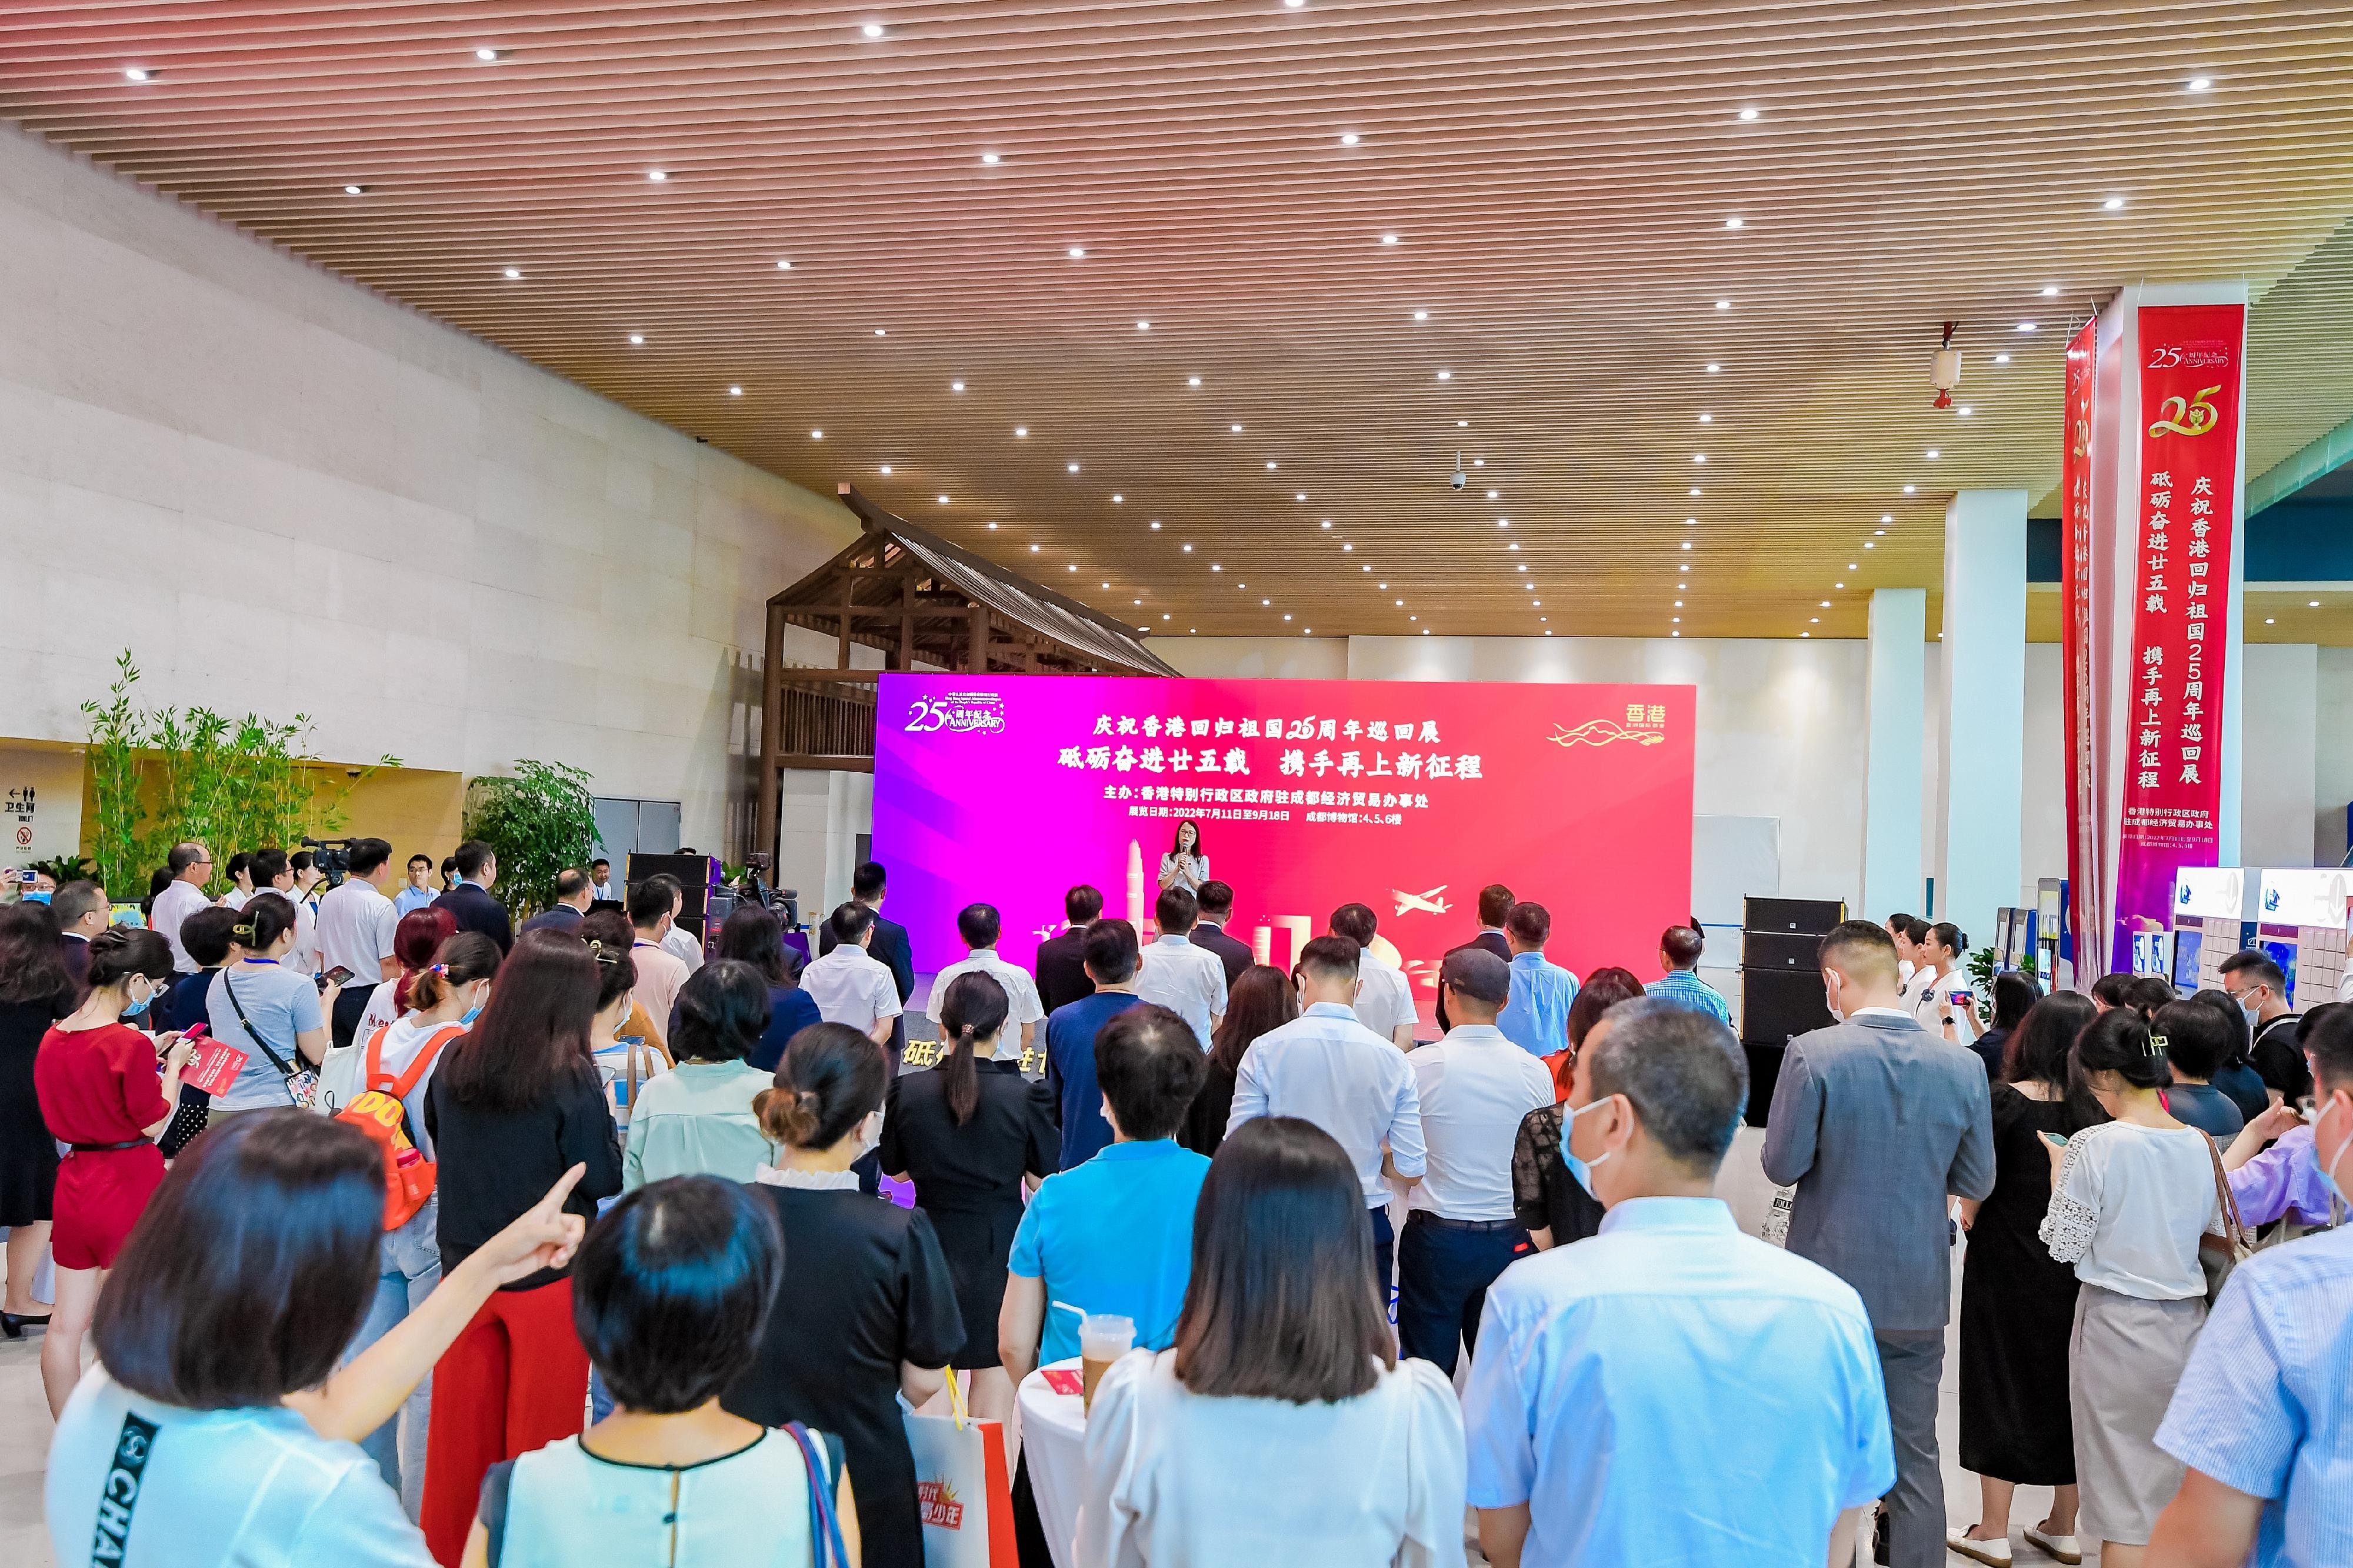 The Hong Kong Economic and Trade Office in Chengdu (CDETO) of the Government of the Hong Kong Special Administrative Region (HKSAR) has been holding a series of celebration activities since June to mark the 25th anniversary of the establishment of the HKSAR. Photo shows people giving a positive response to the opening ceremony today (July 11) in Chengdu for the CDETO's roving exhibition on the 25th anniversary of Hong Kong's return to the motherland. 